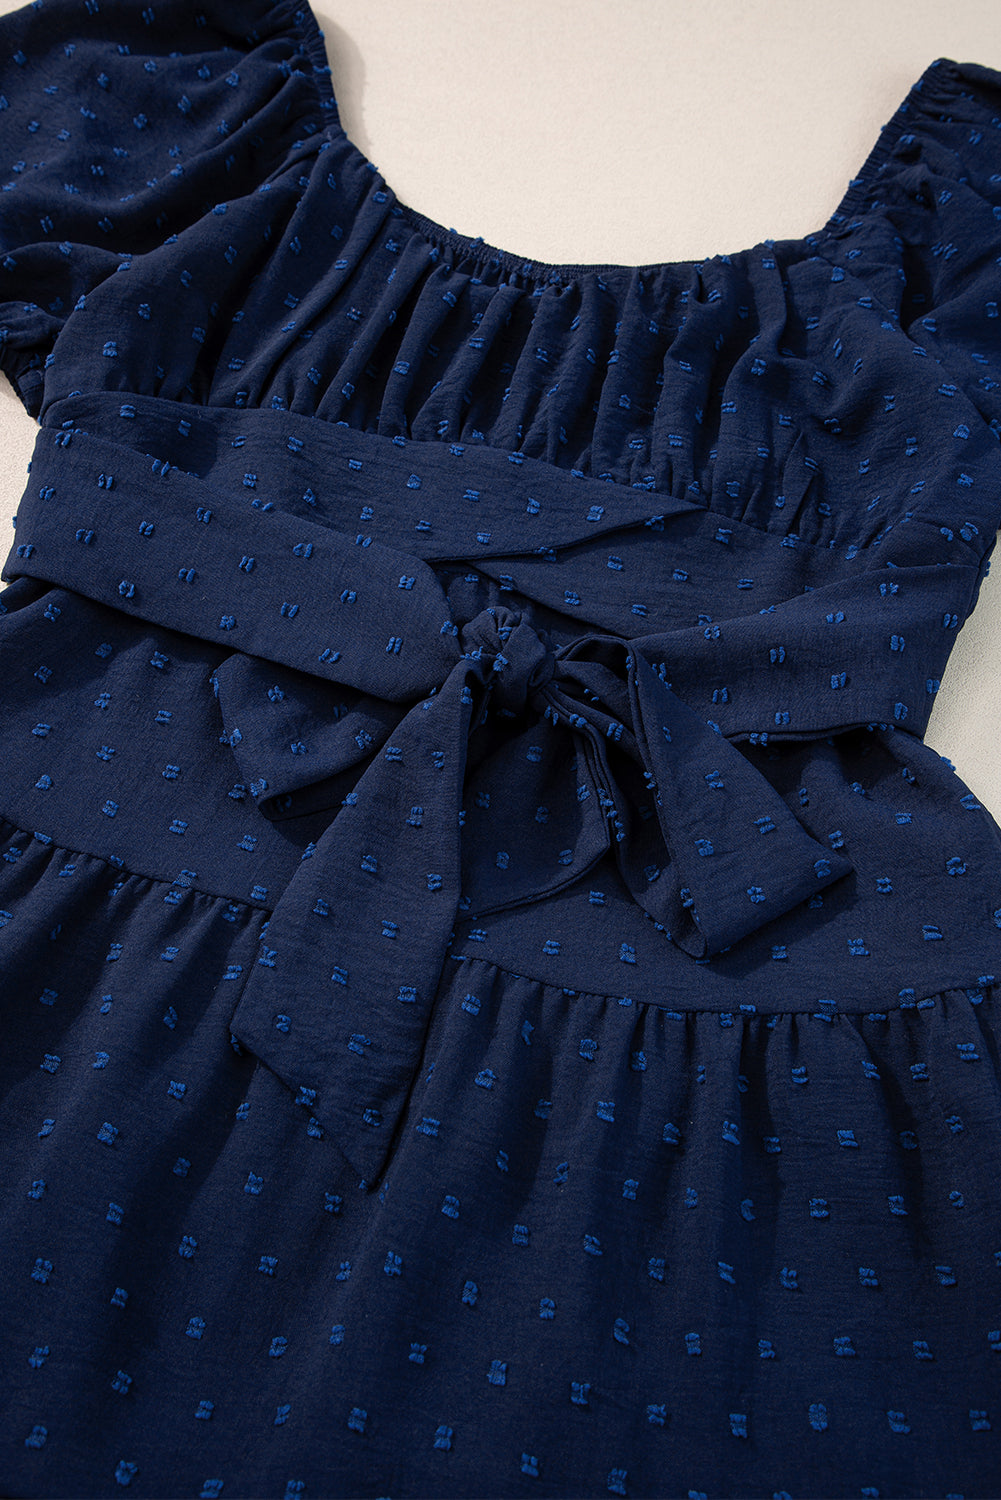 Navy Blue Swiss Dot Jacquard Puff Sleeve Crossover Tied Tiered Dress